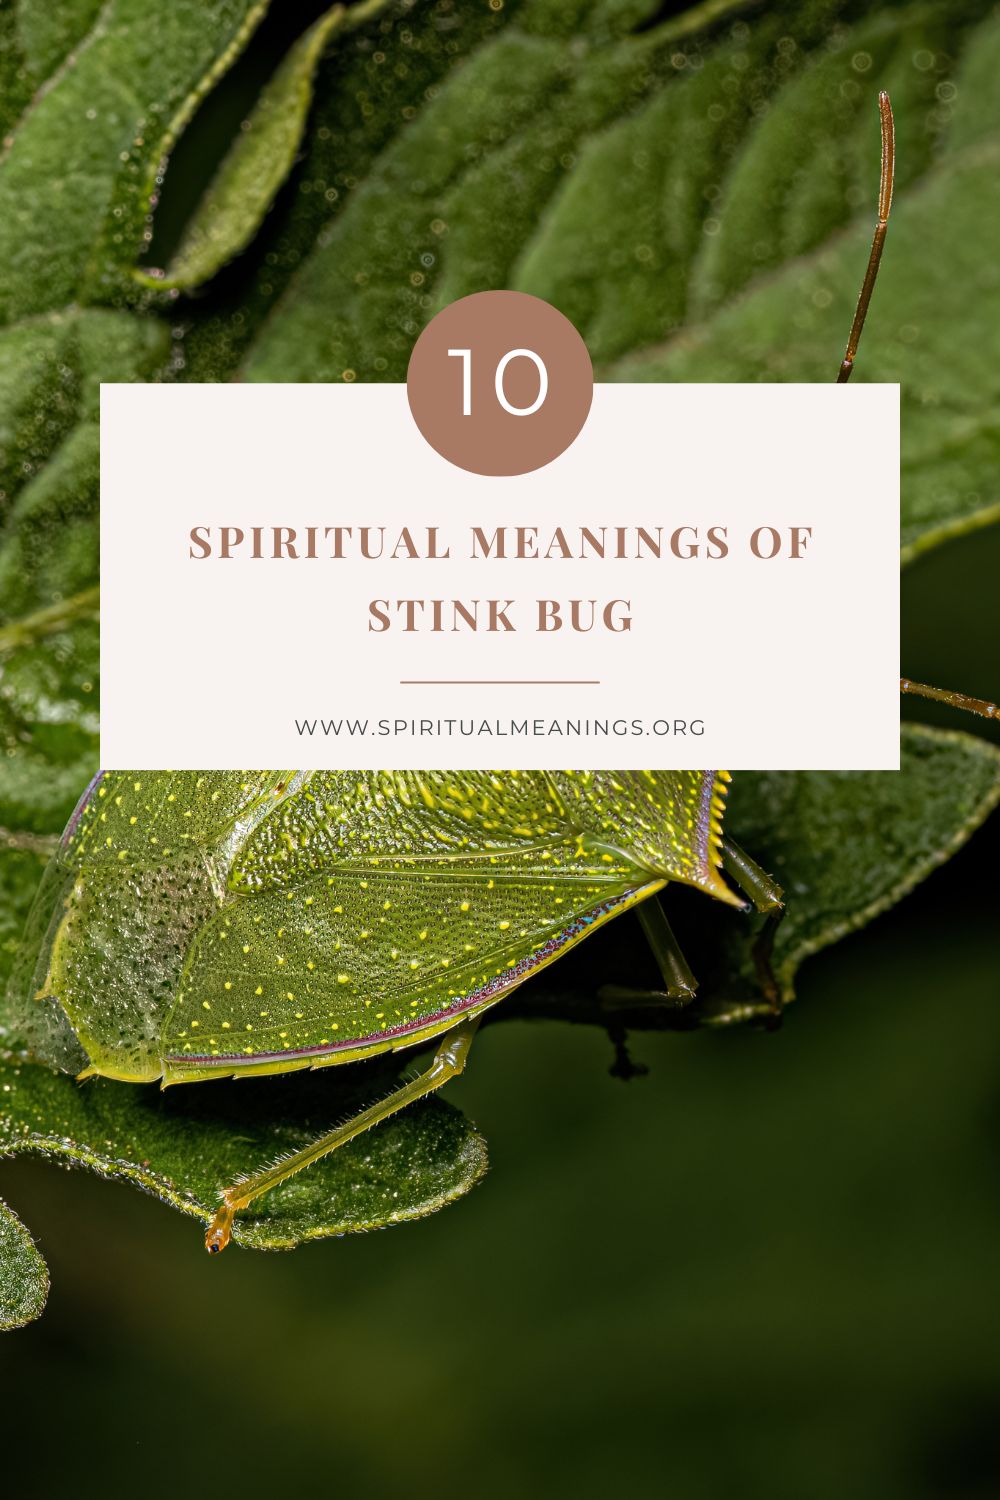 10 Spiritual Meanings of Stink Bug